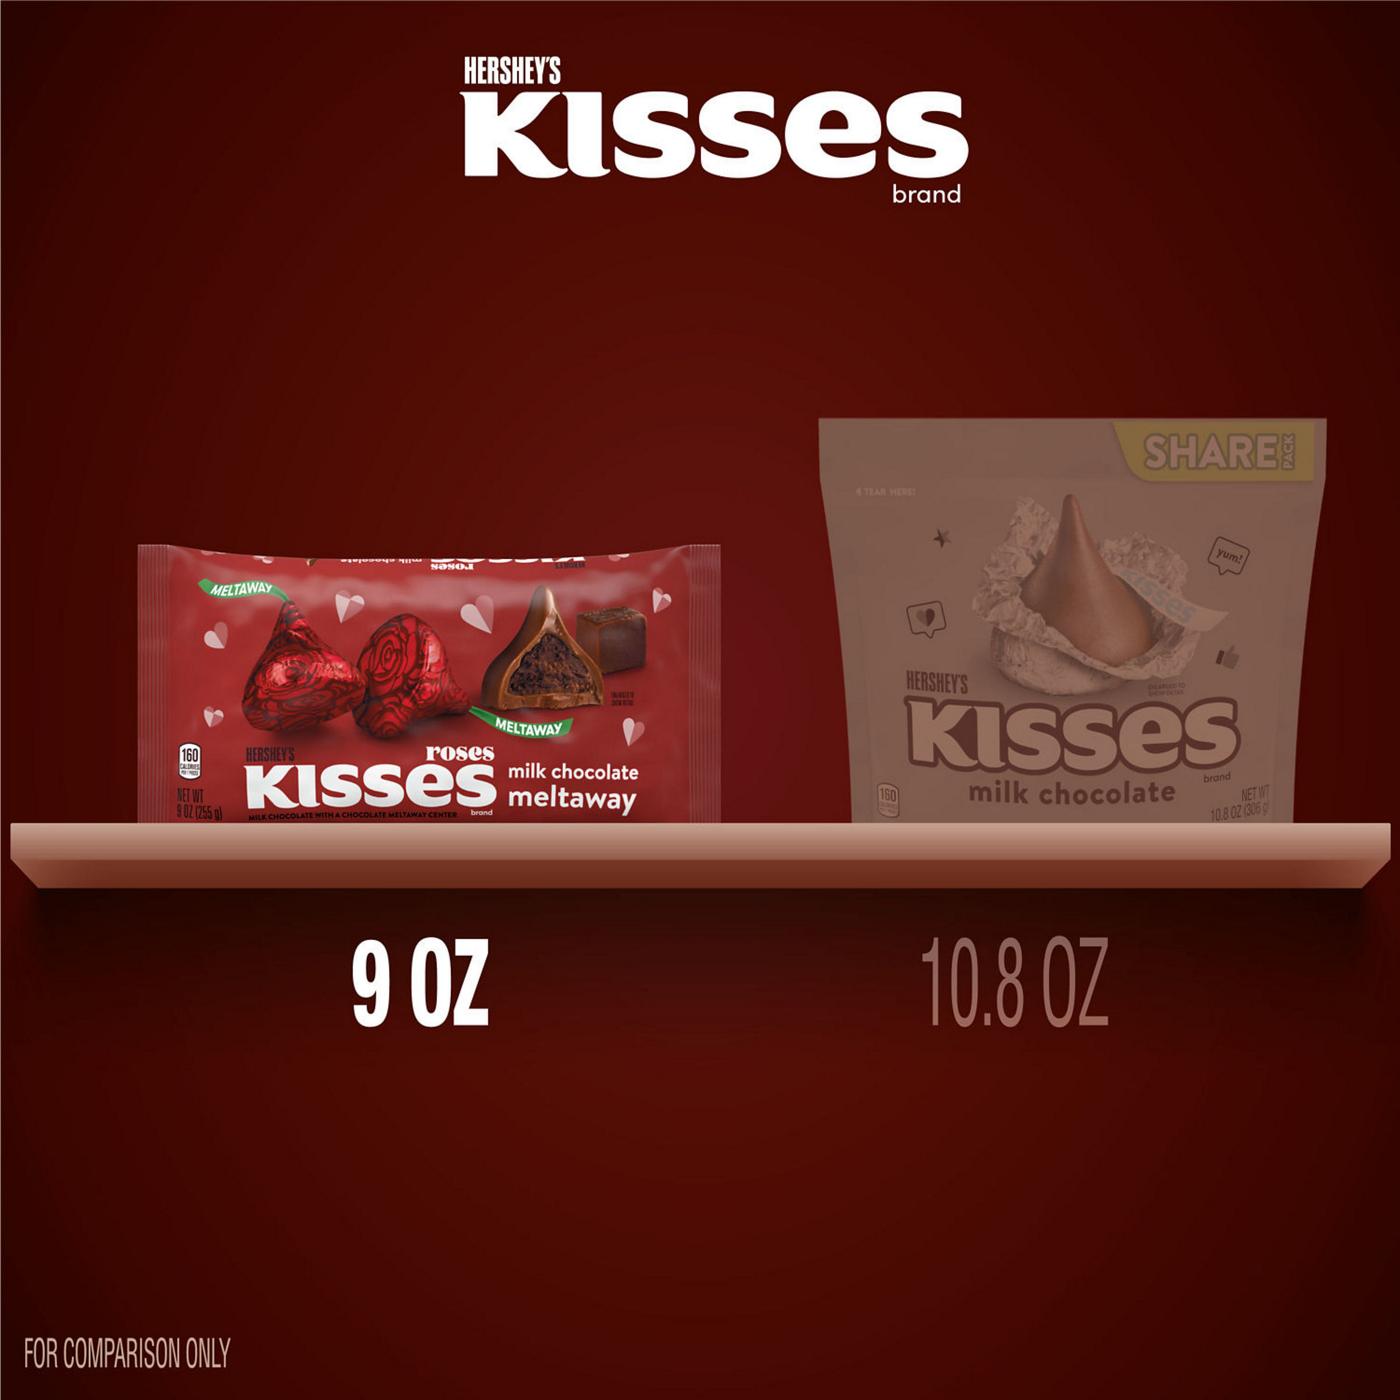 Hershey's Kisses Roses Milk Chocolate Meltaway Valentine's Candy; image 6 of 7